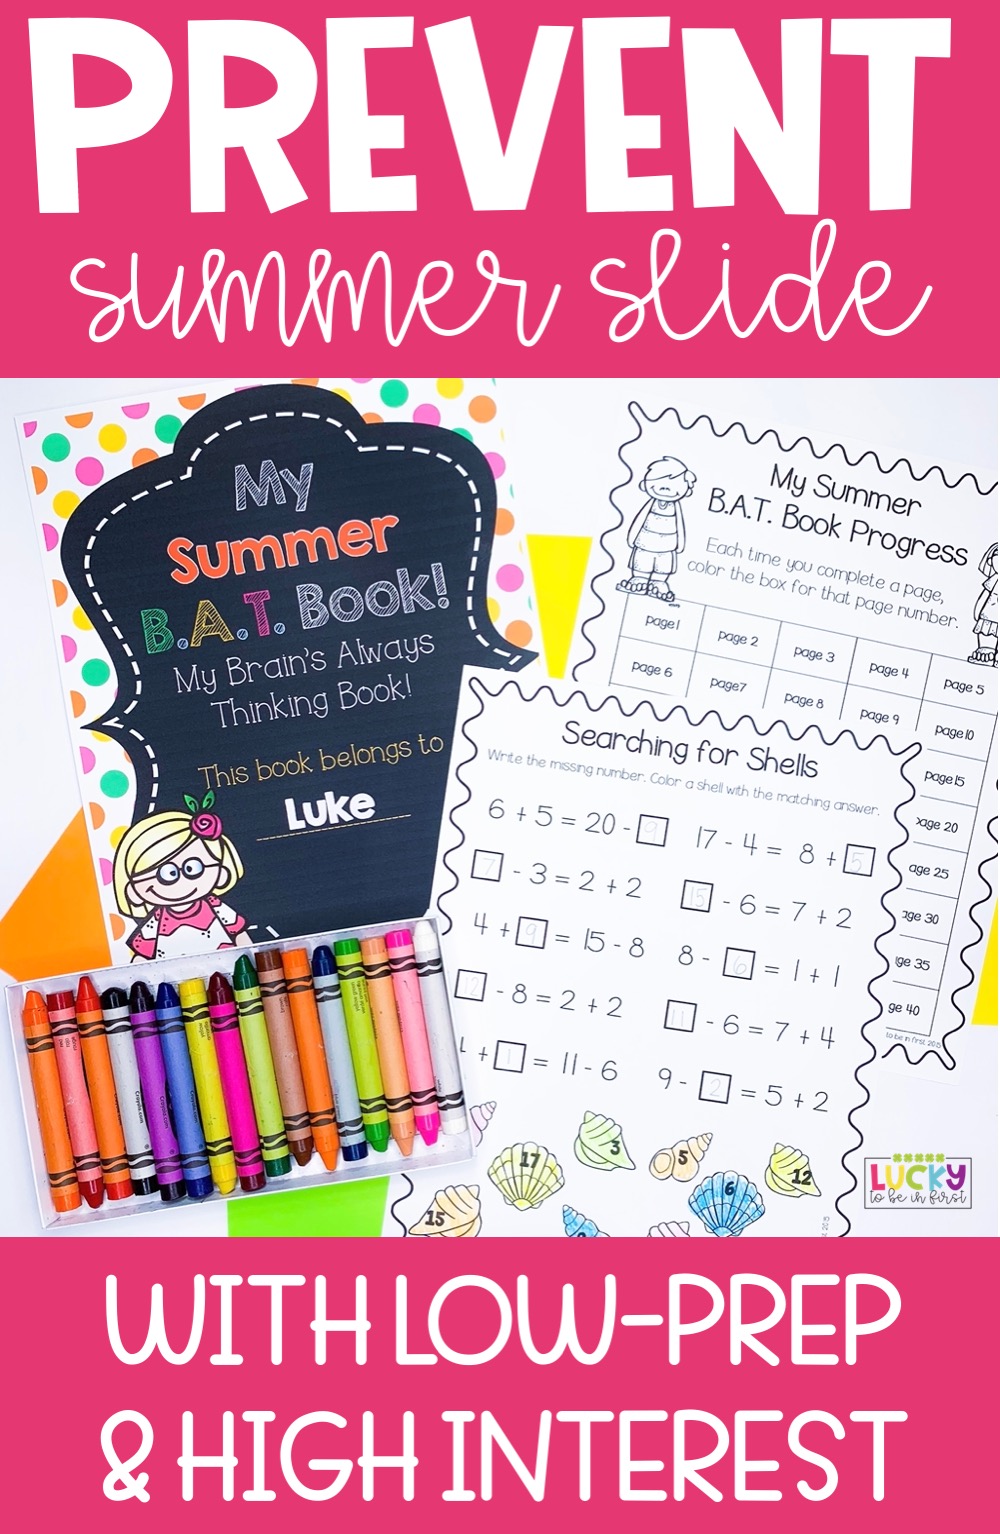 Prevent Summer Slide with low-prep and high interest activities from Lucky to Be in First